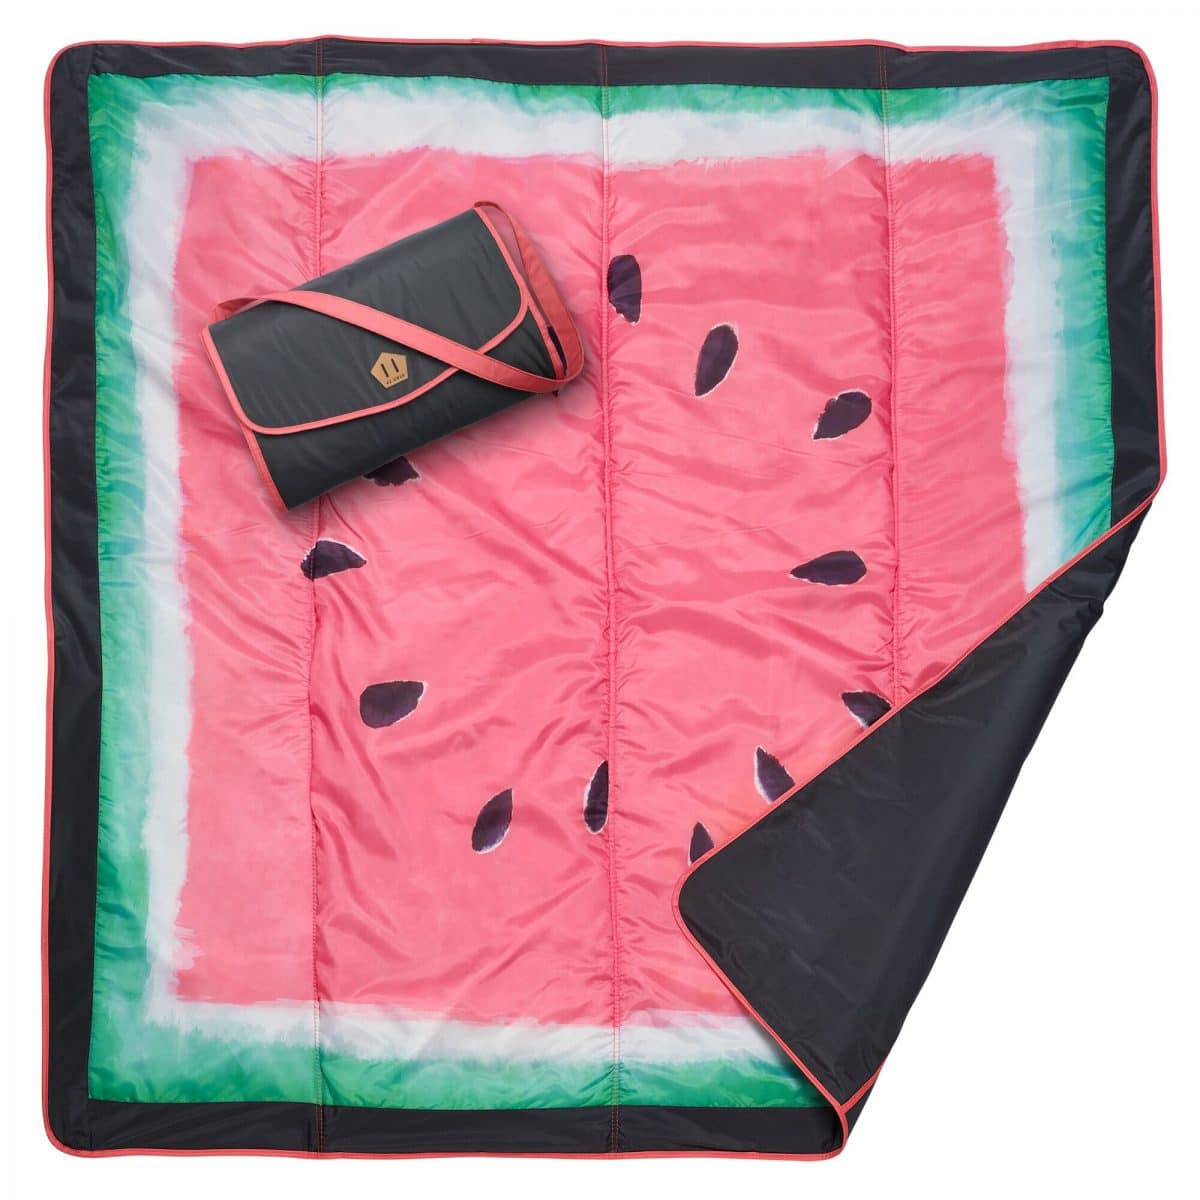 Best Baby Travel Accessories: Jj Cole Baby Play Mat